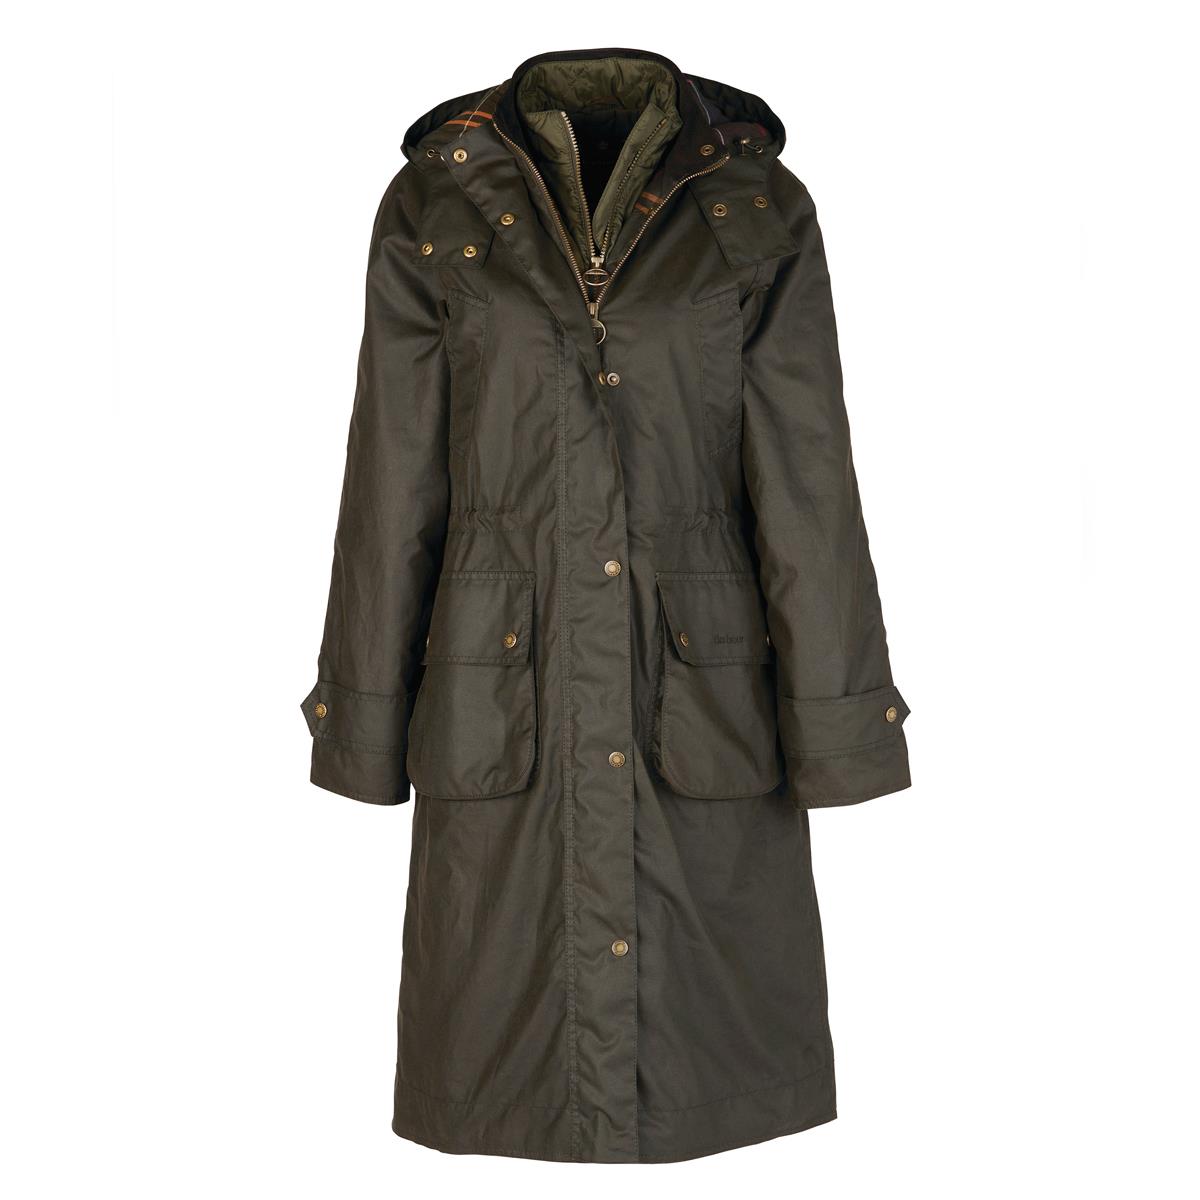 What are the reference numbers for the Barbour Cannich Wax Jacket?